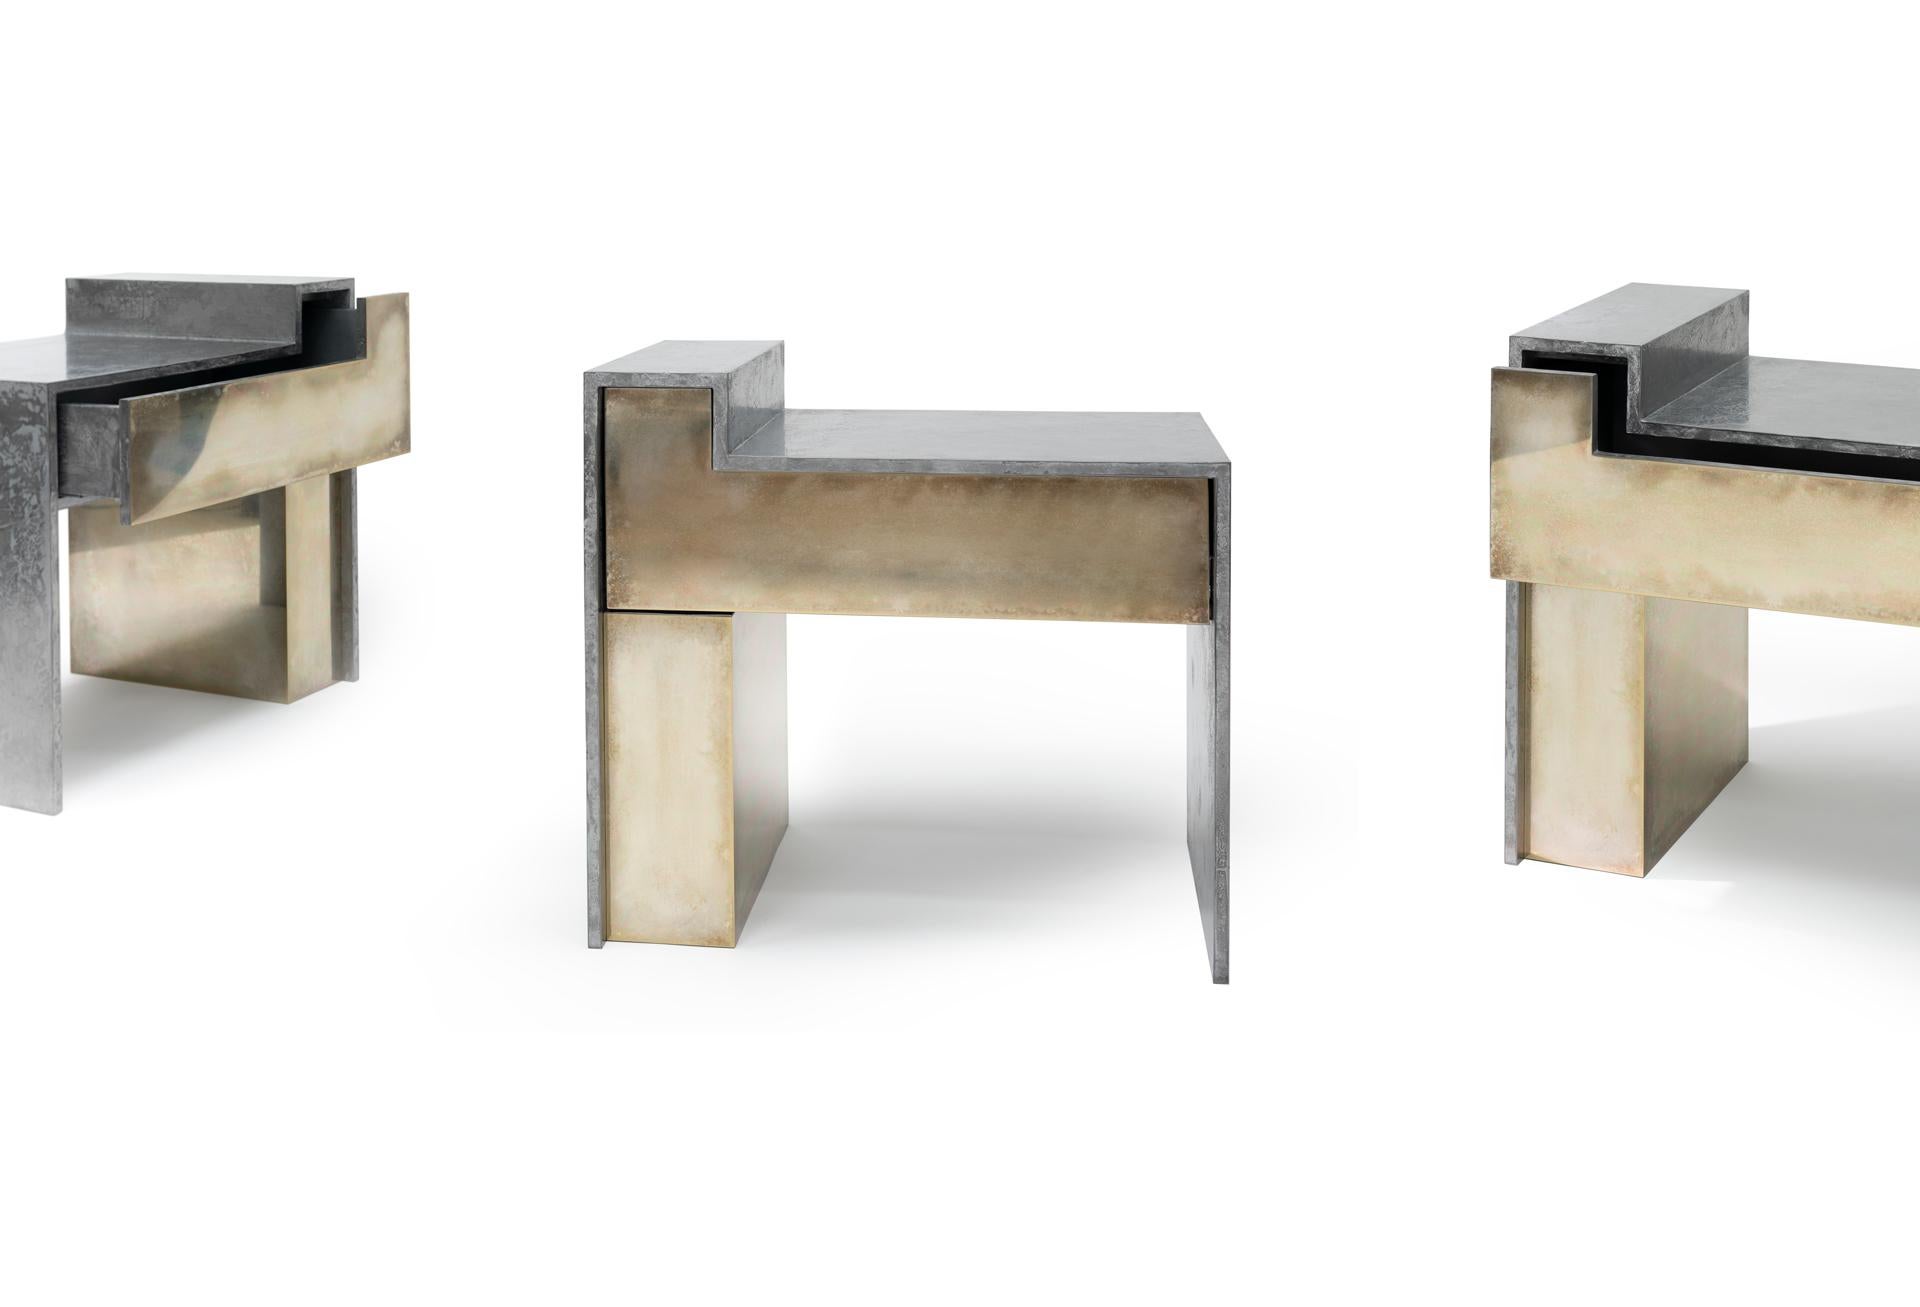 The bespoke RLB BST bedside table is a nightstand that can be produced in a variety of brass and liquid metal based finishes. As pictured, these tables feature hand silvered brass façades with a liquid gun metal finished structure. A single drawer